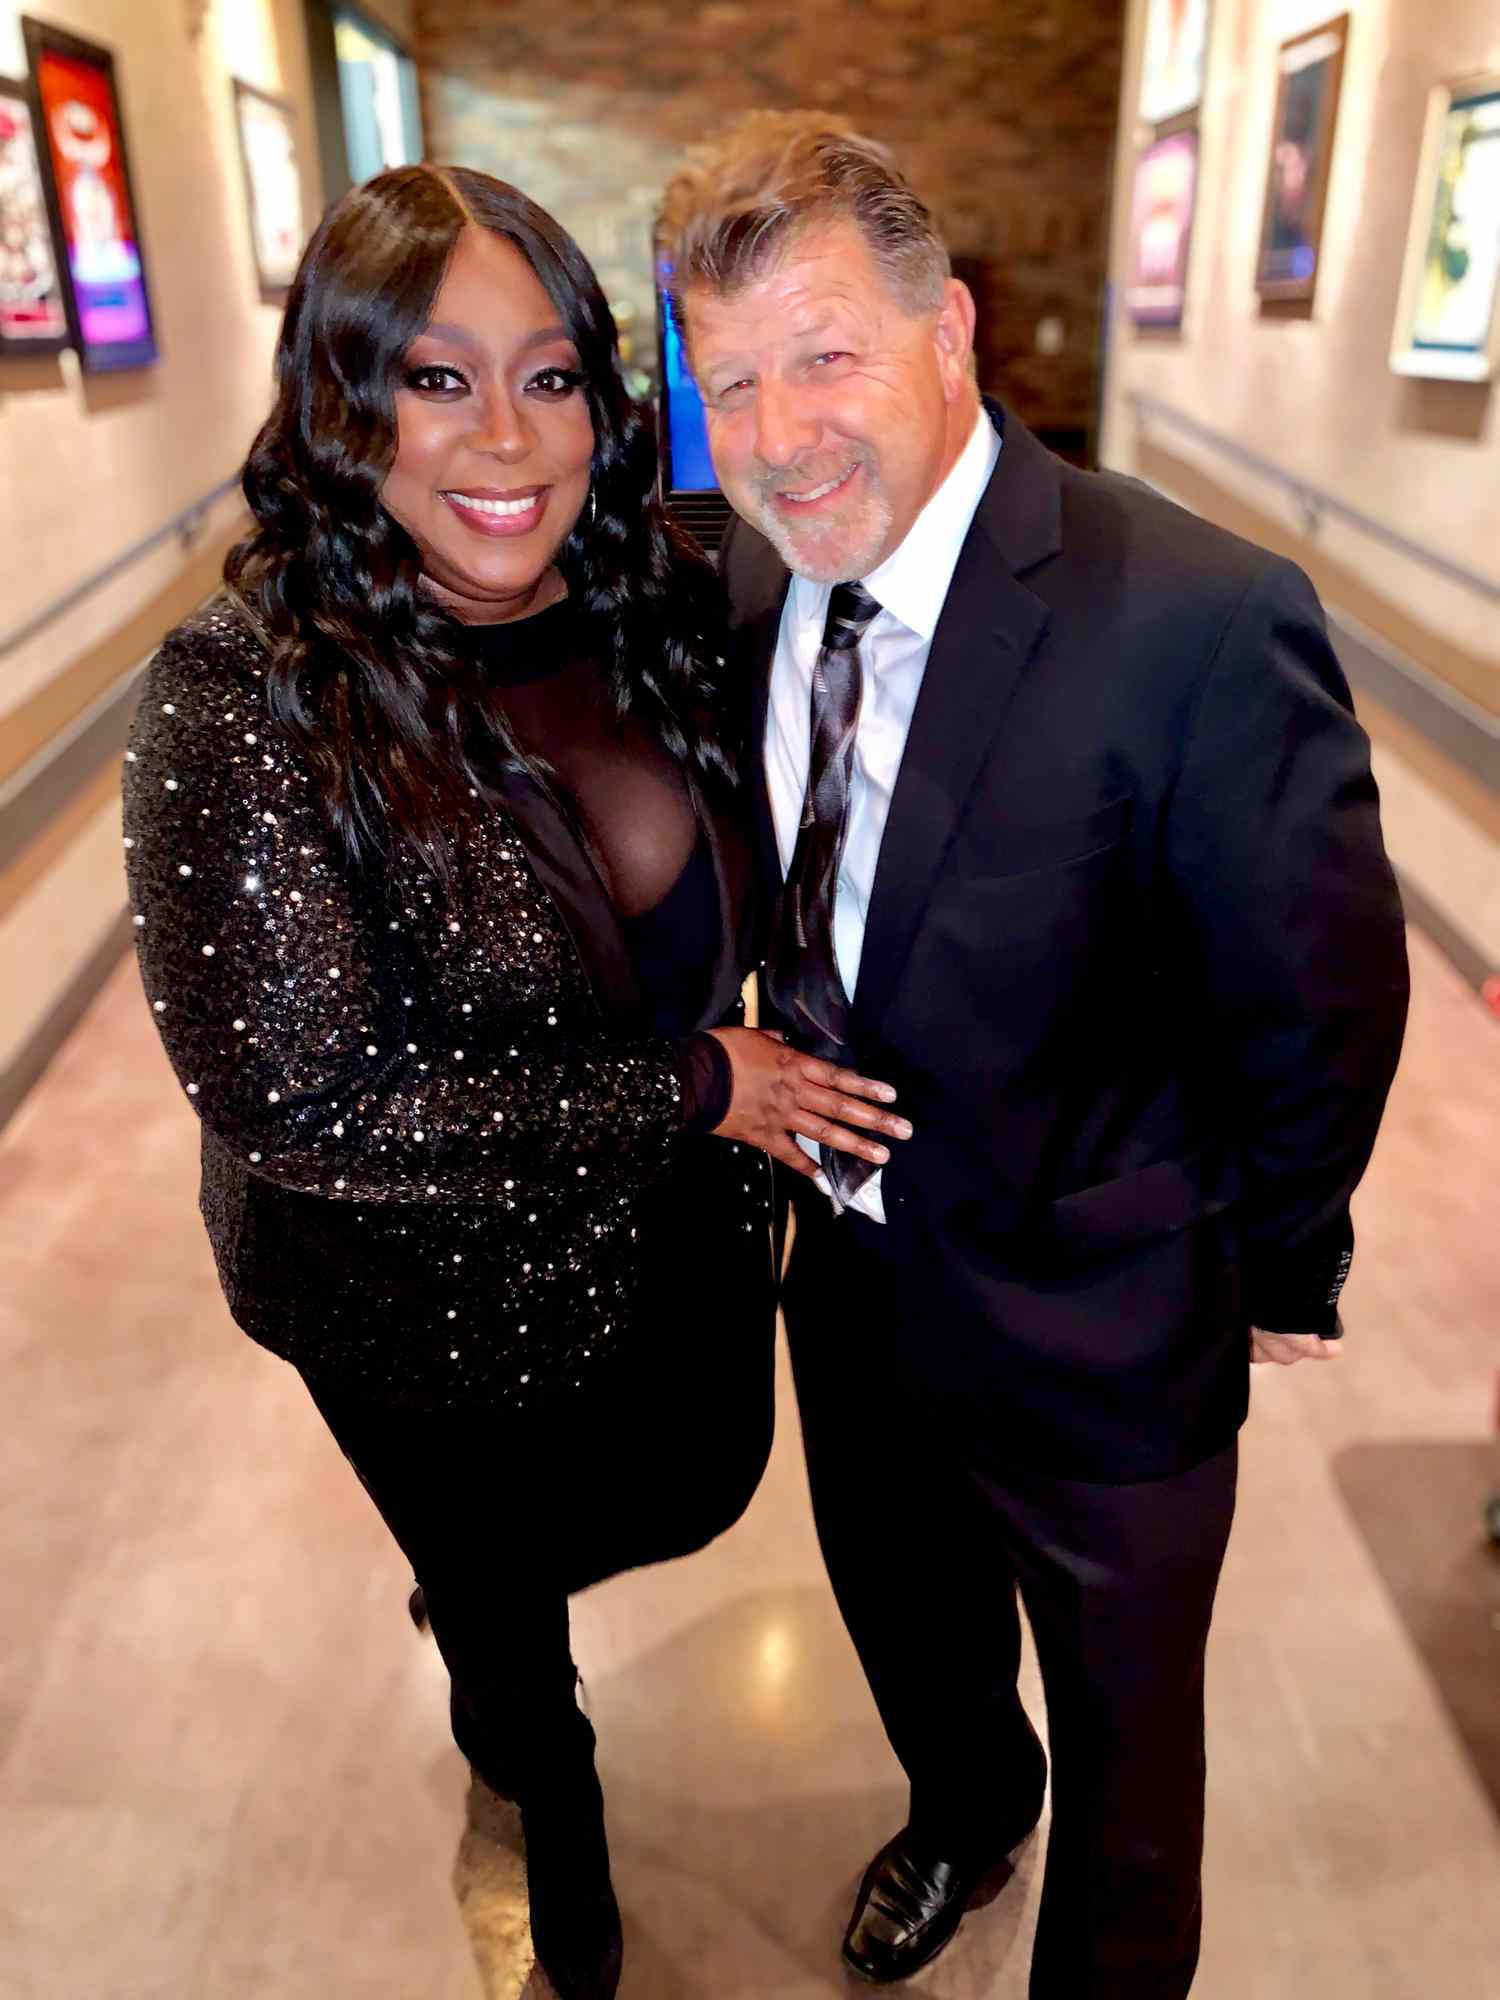 The Real's Loni Love Talks Her Interracial Relationship